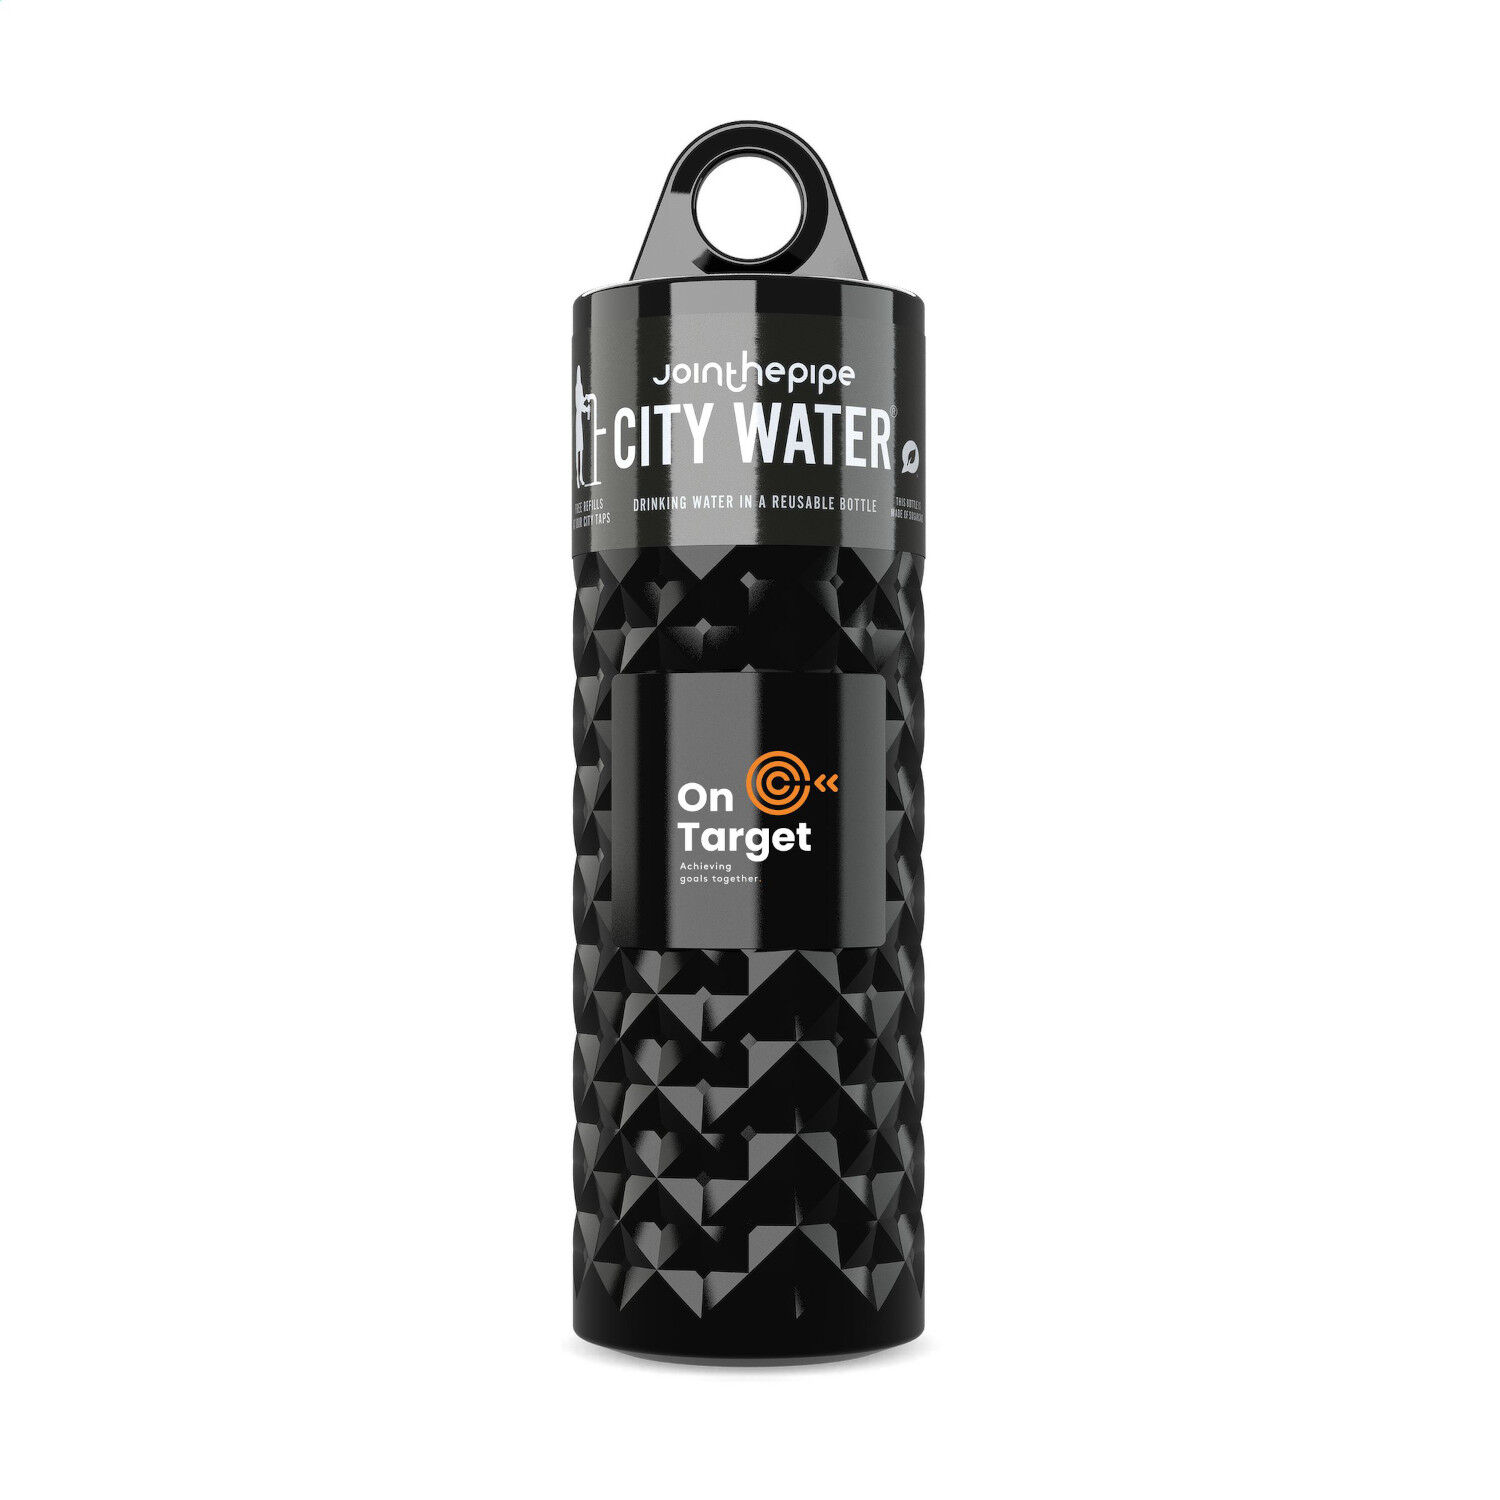 Nairobi Water Bottle from Join The Pipe